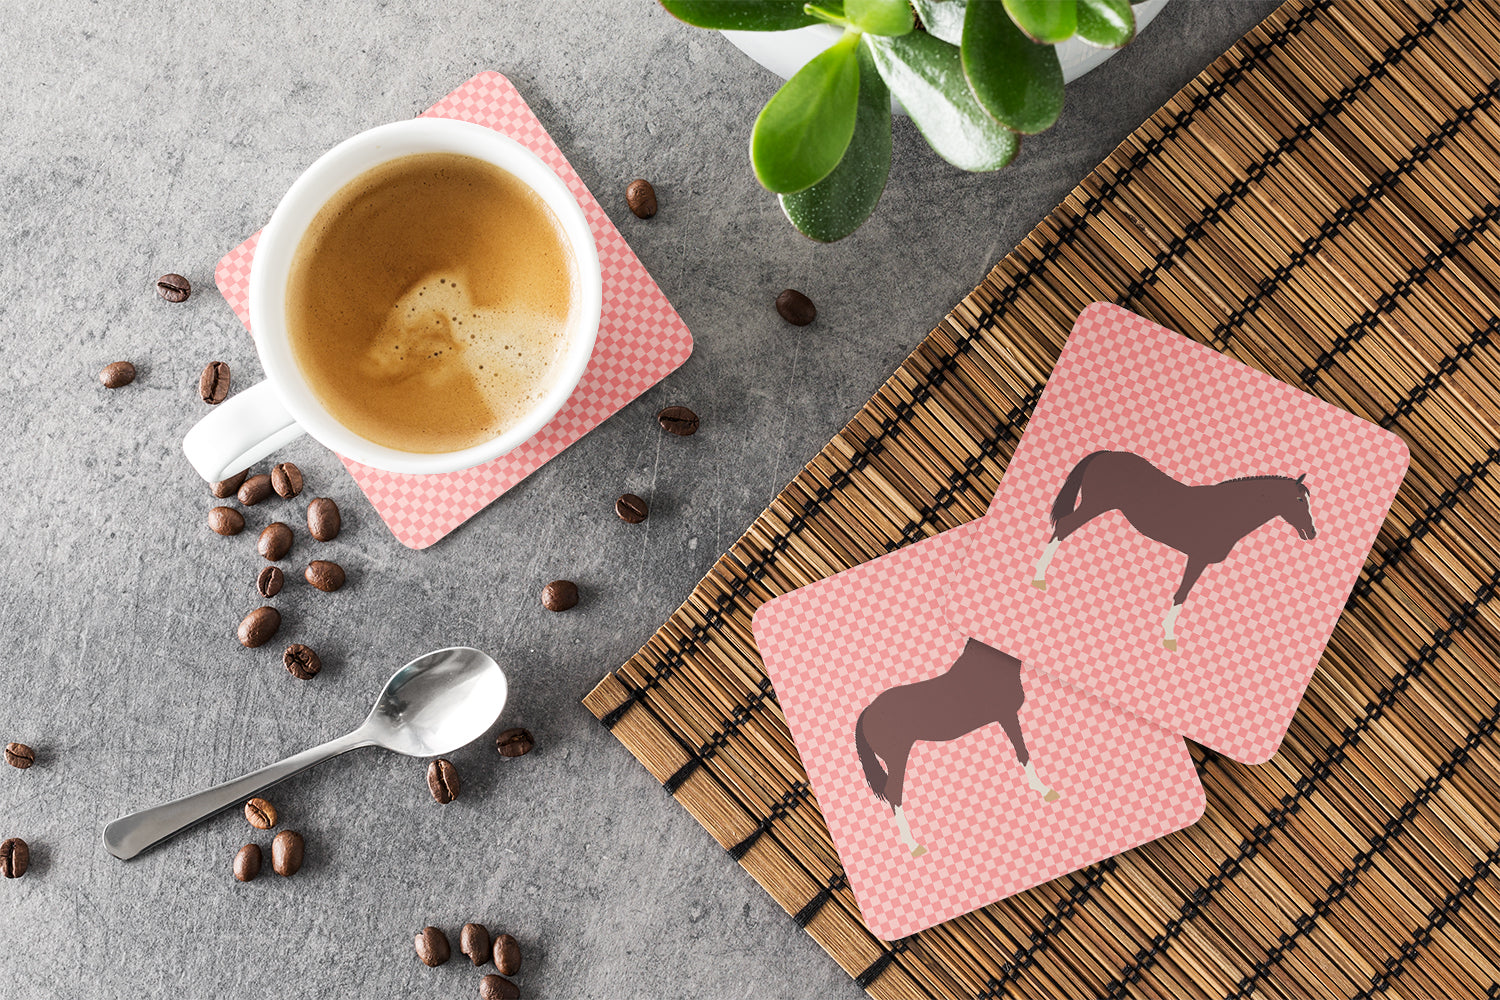 English Thoroughbred Horse Pink Check Foam Coaster Set of 4 BB7913FC - the-store.com